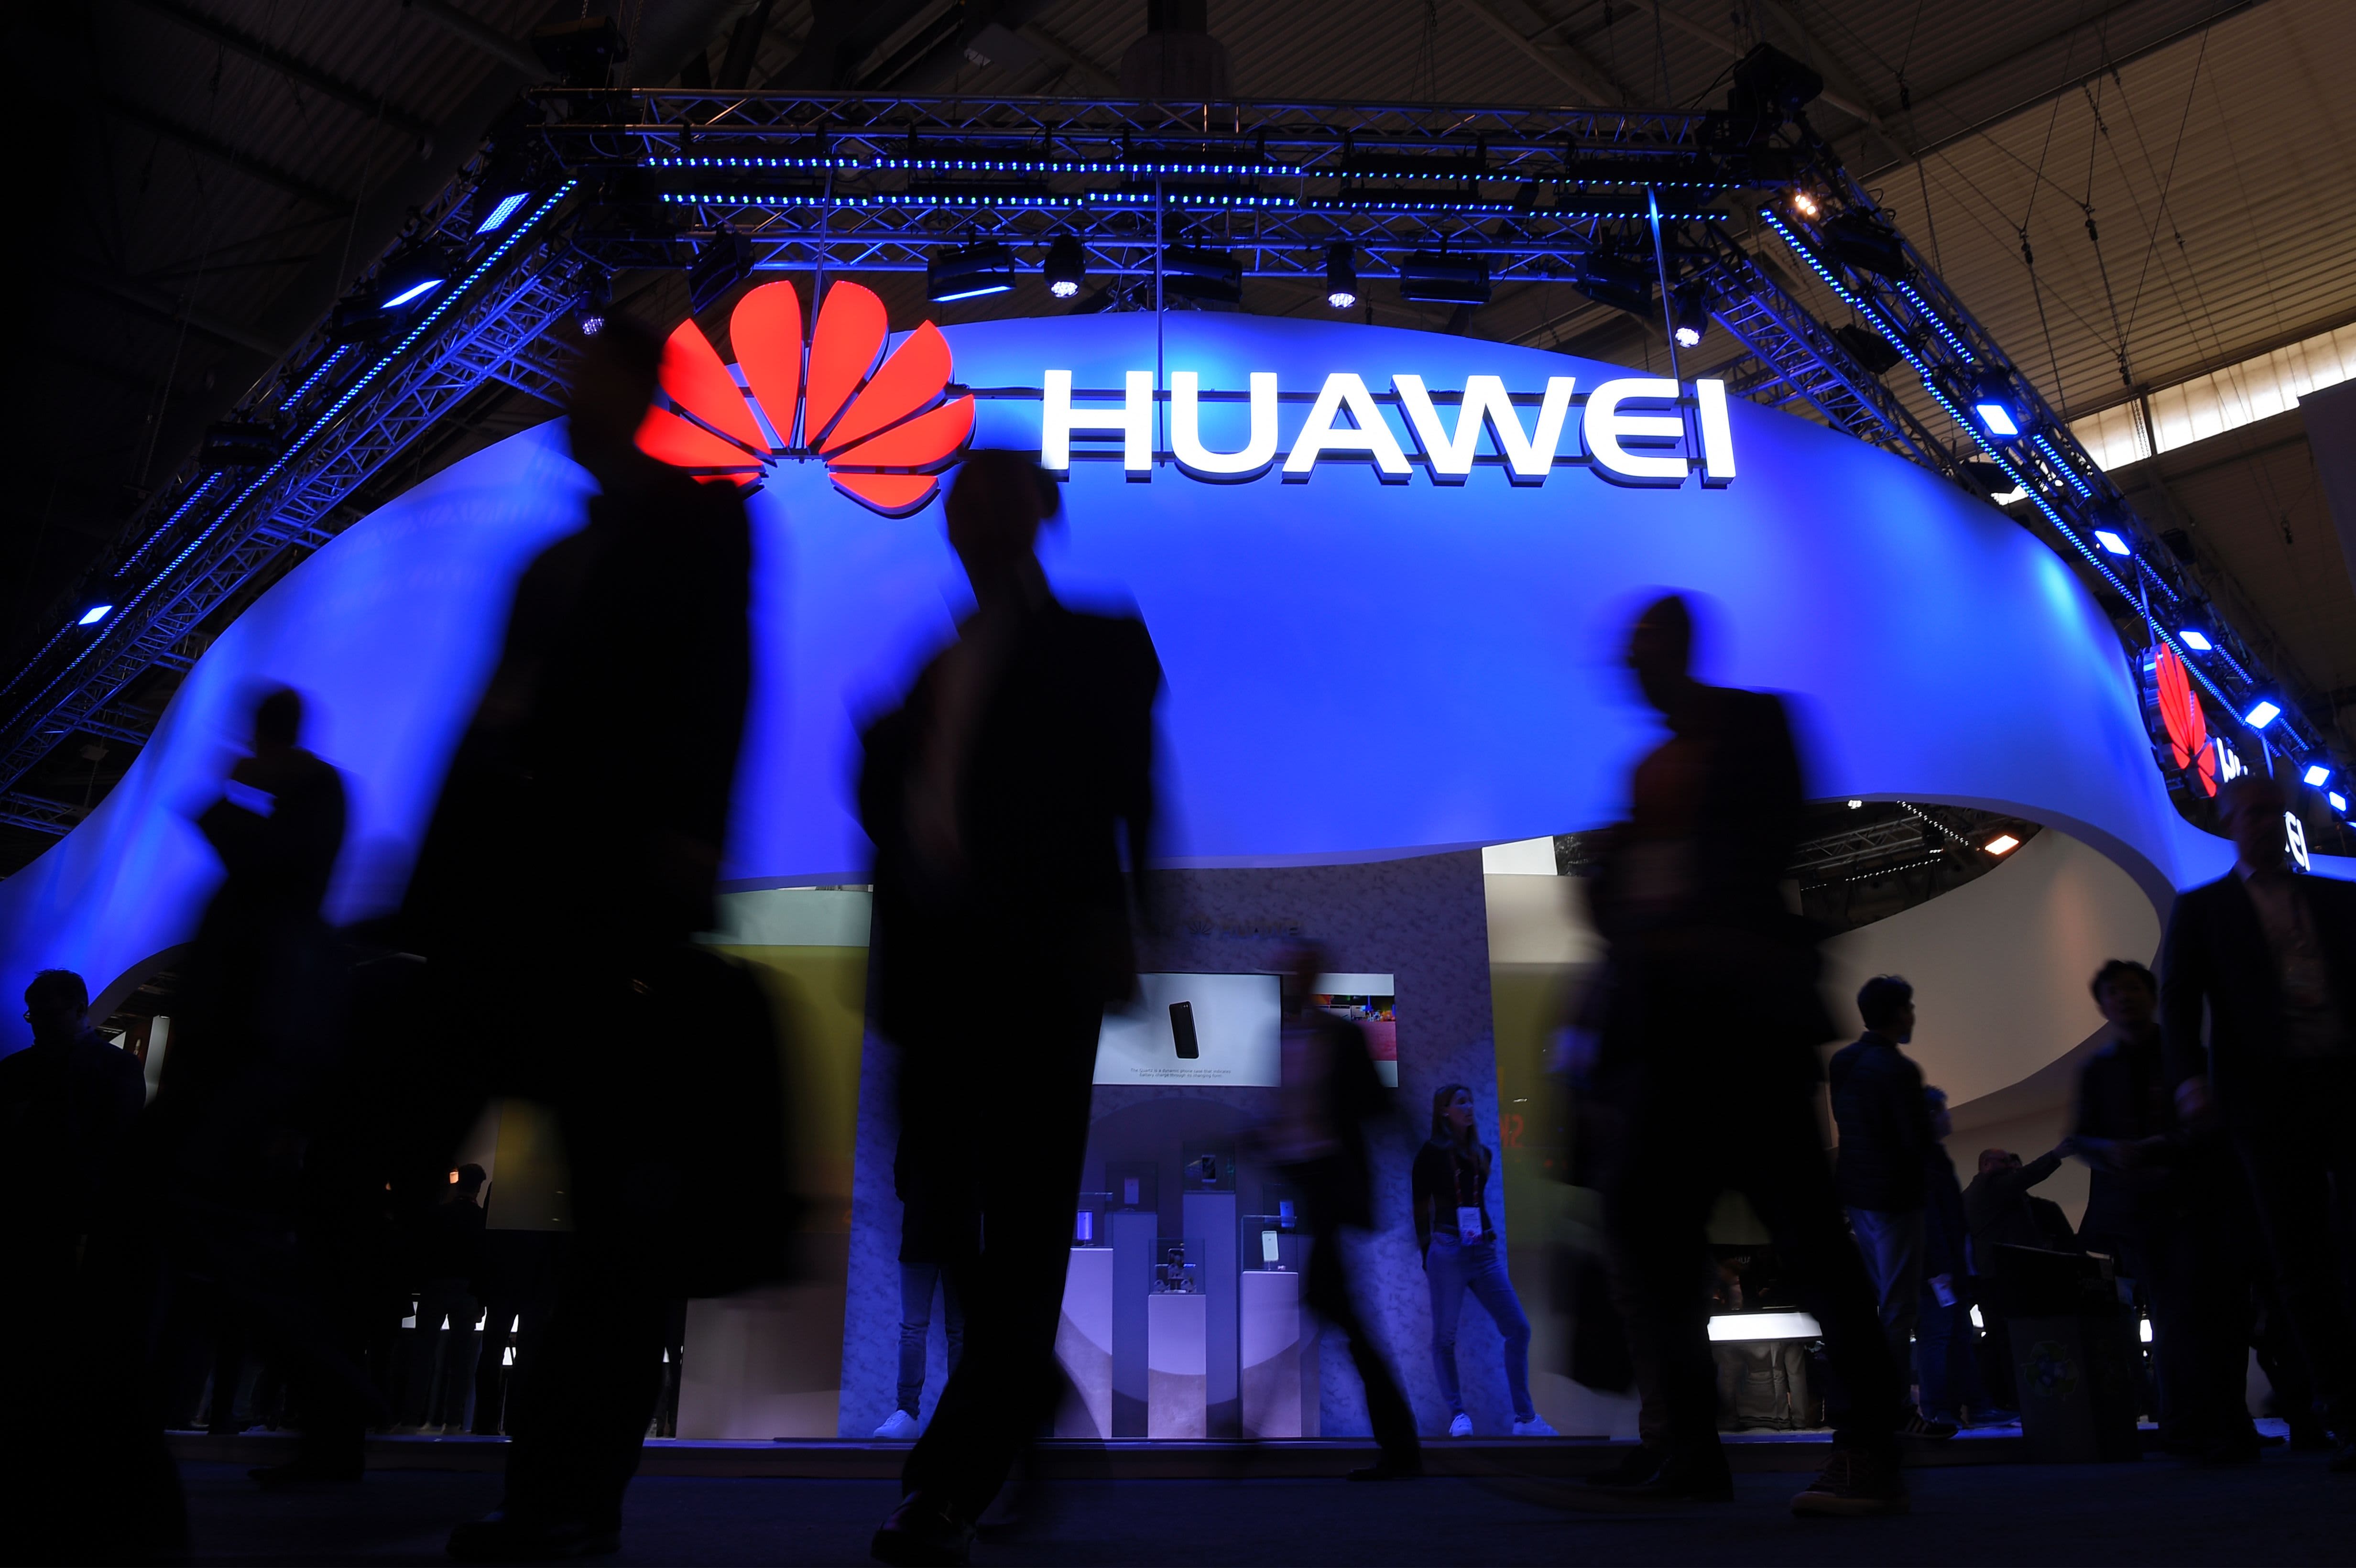 China's Huawei sues the US, claiming it shouldn't be blocked from selling to federal government